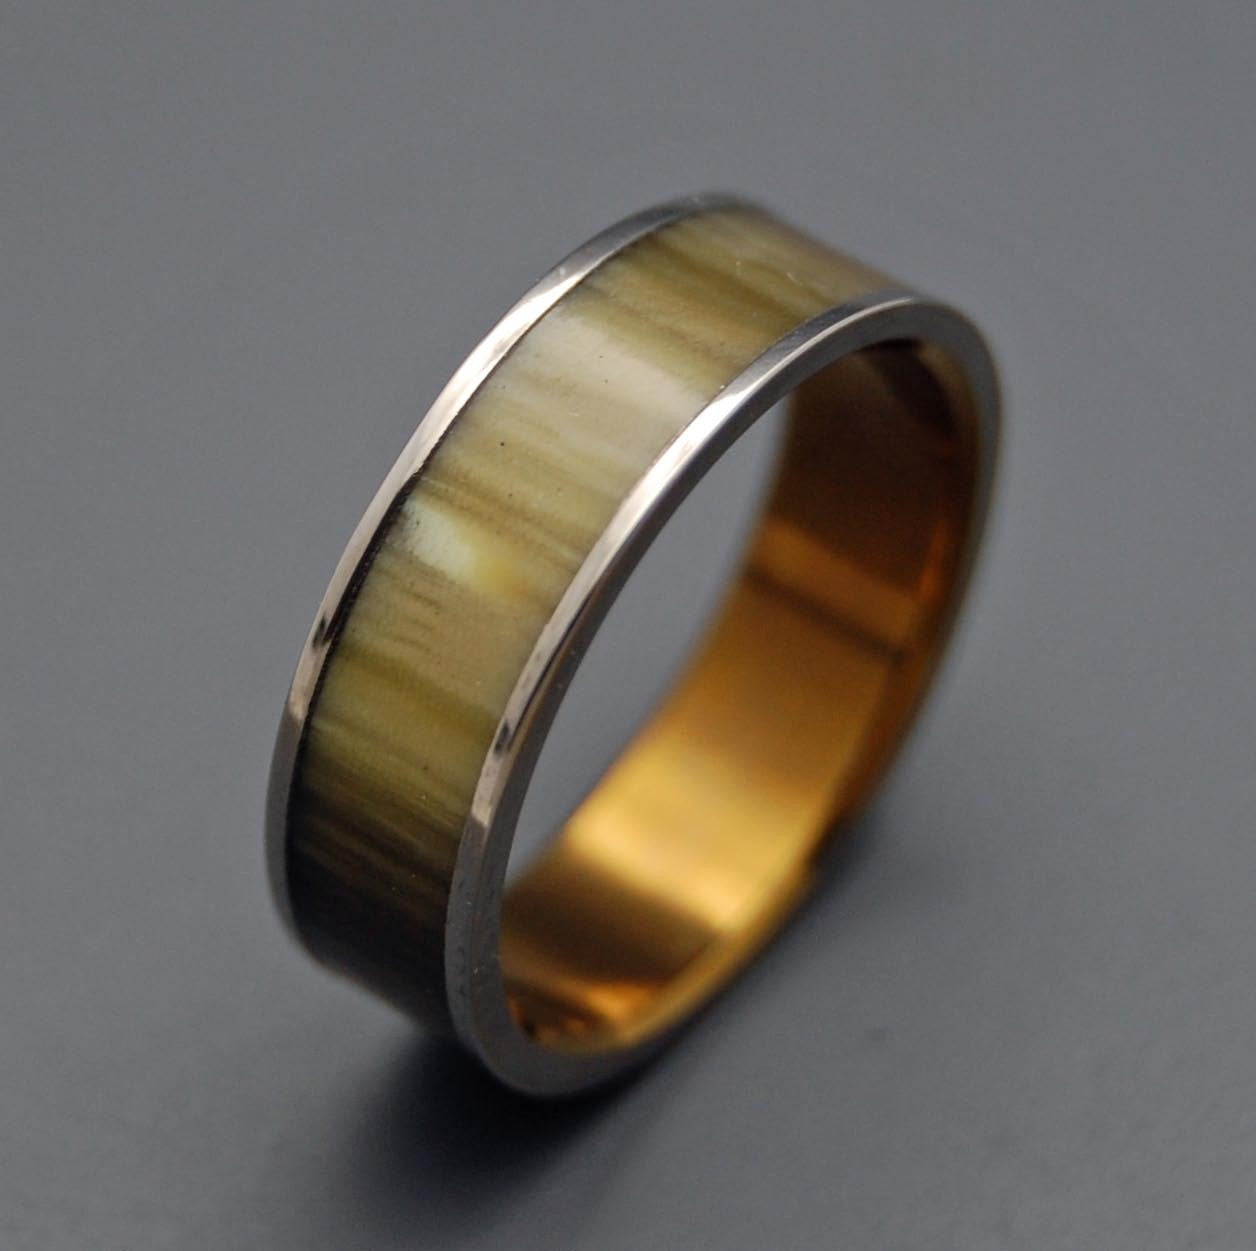 Love Corral | Horn and Hand Anodized Titanium Wedding Ring - Minter and Richter Designs